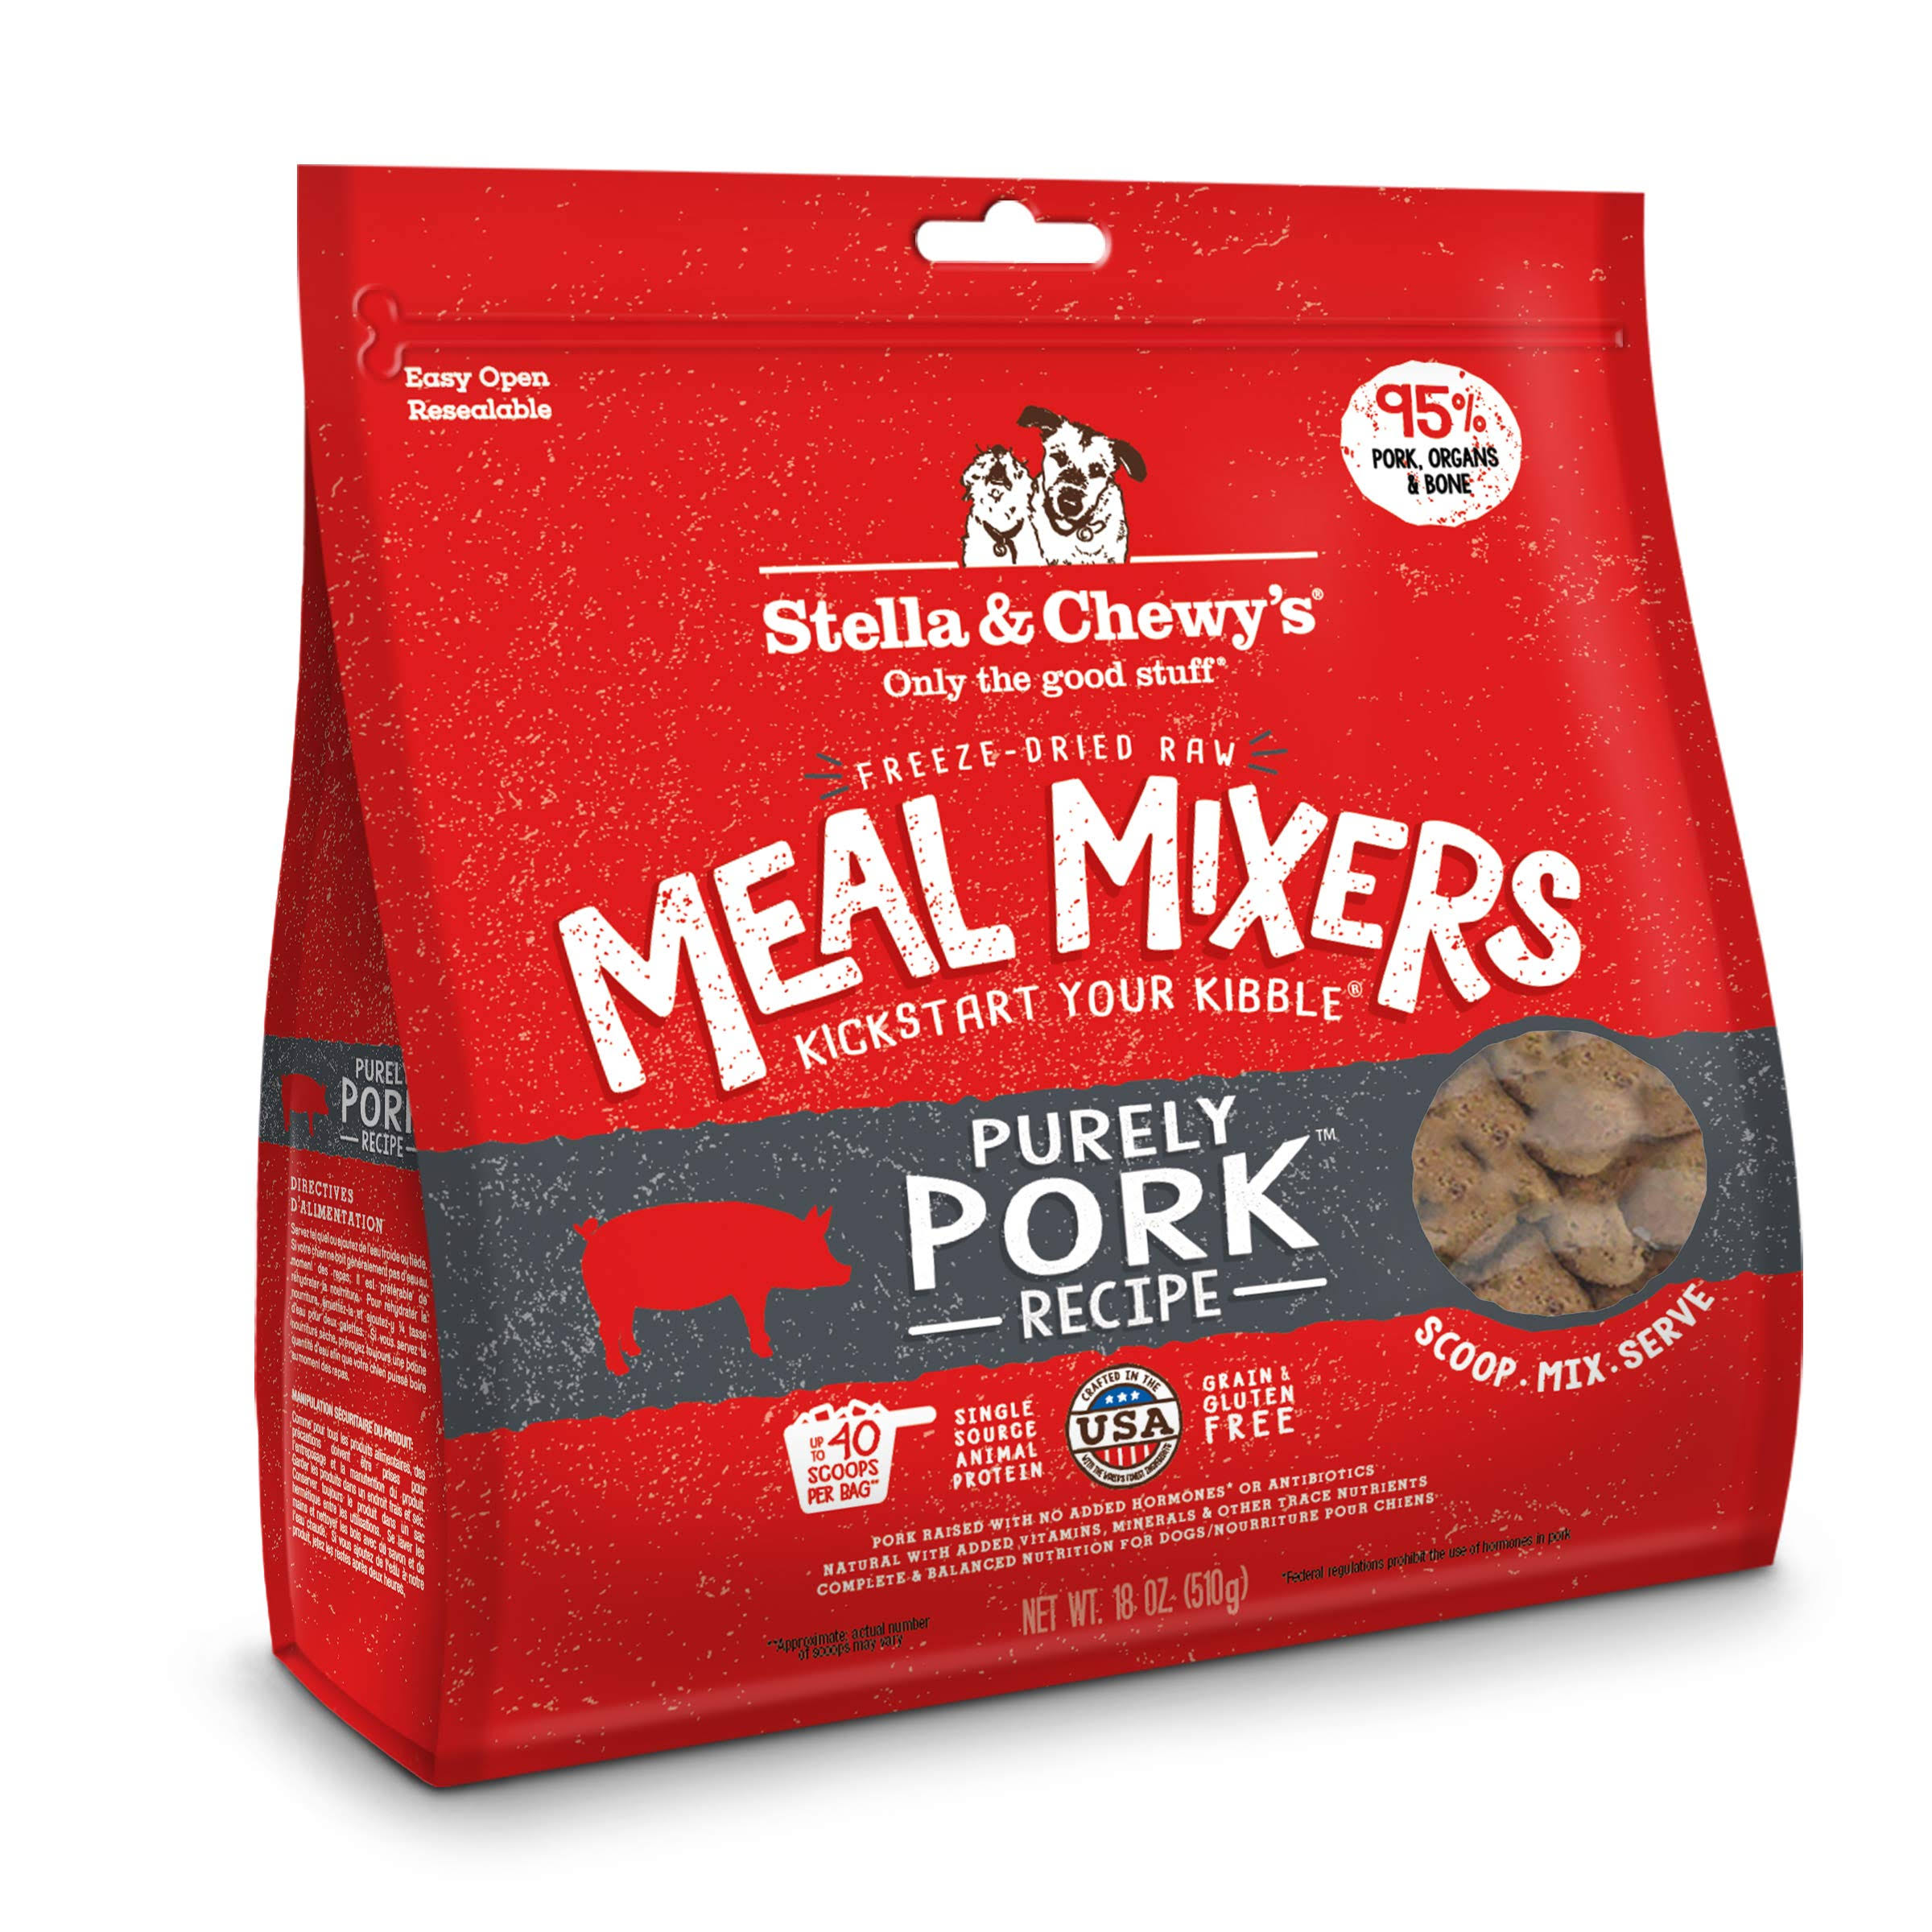 Stella & Chewy's - Purely Pork Meal Mixers (Adult) 18oz(510g)